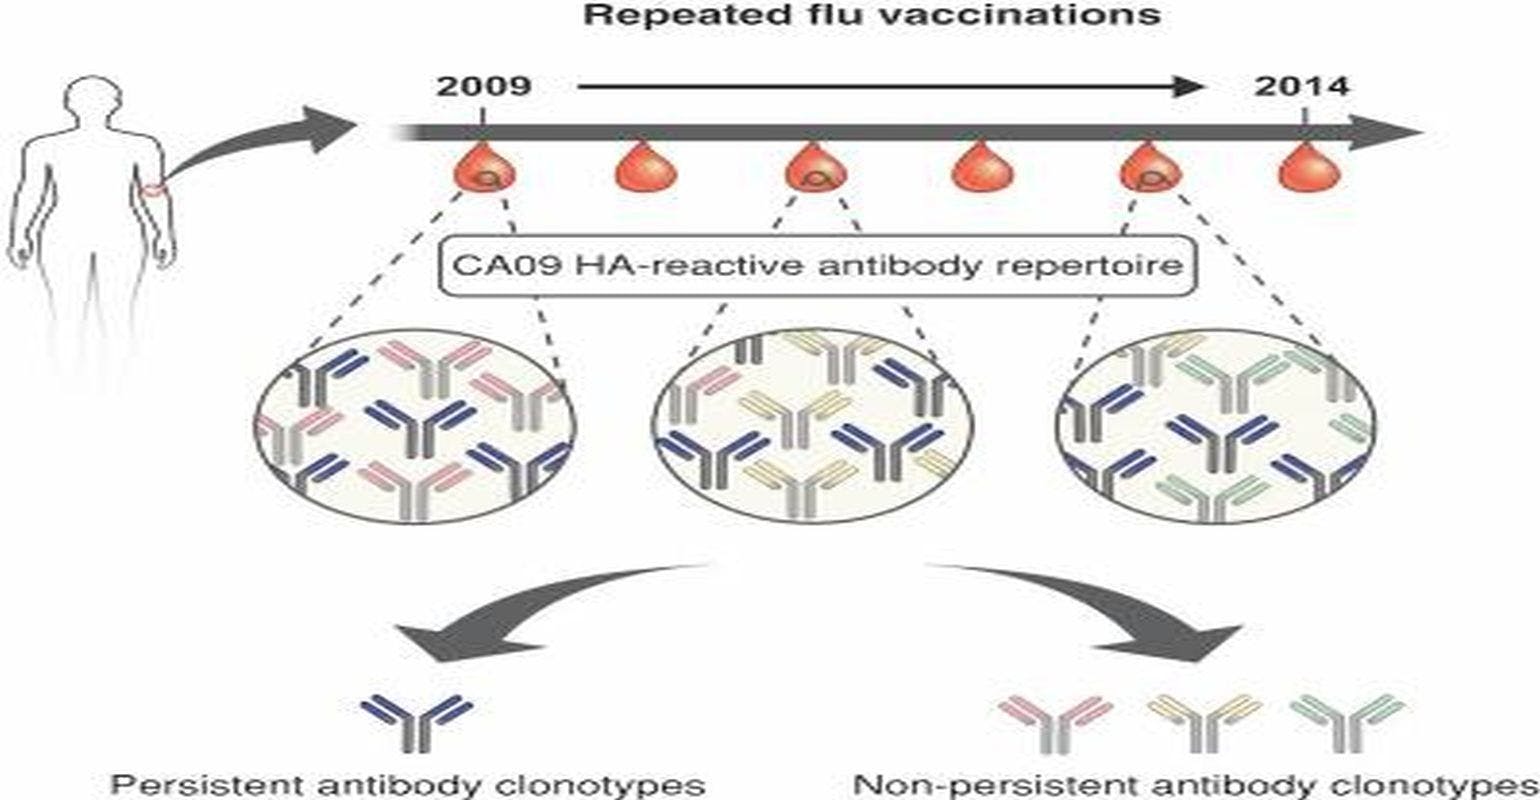 Antibodies From Earlier Exposures Affect Response to New Flu Strains